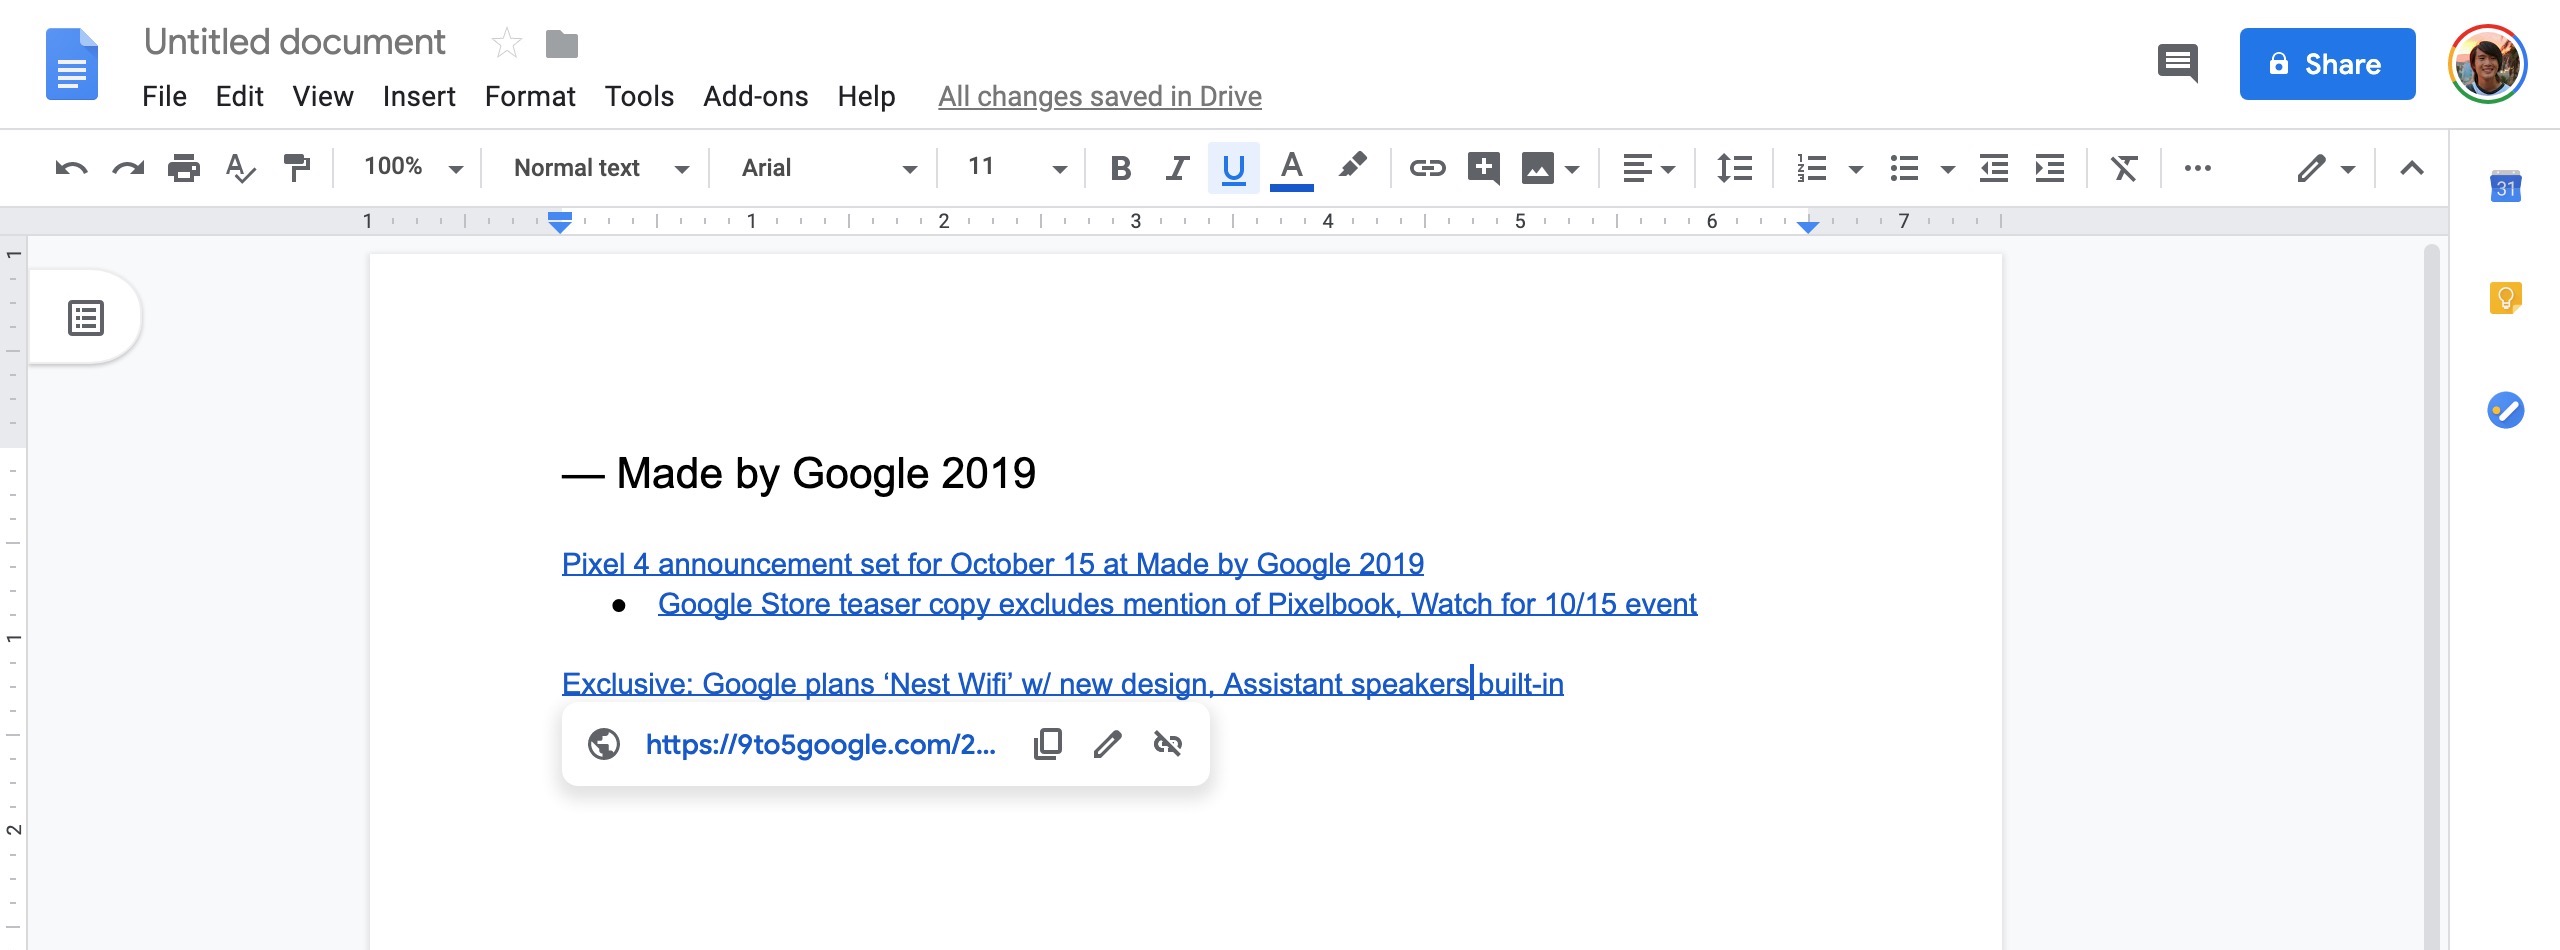 Google Docs on the web testing convenient link previews - 9to5Google